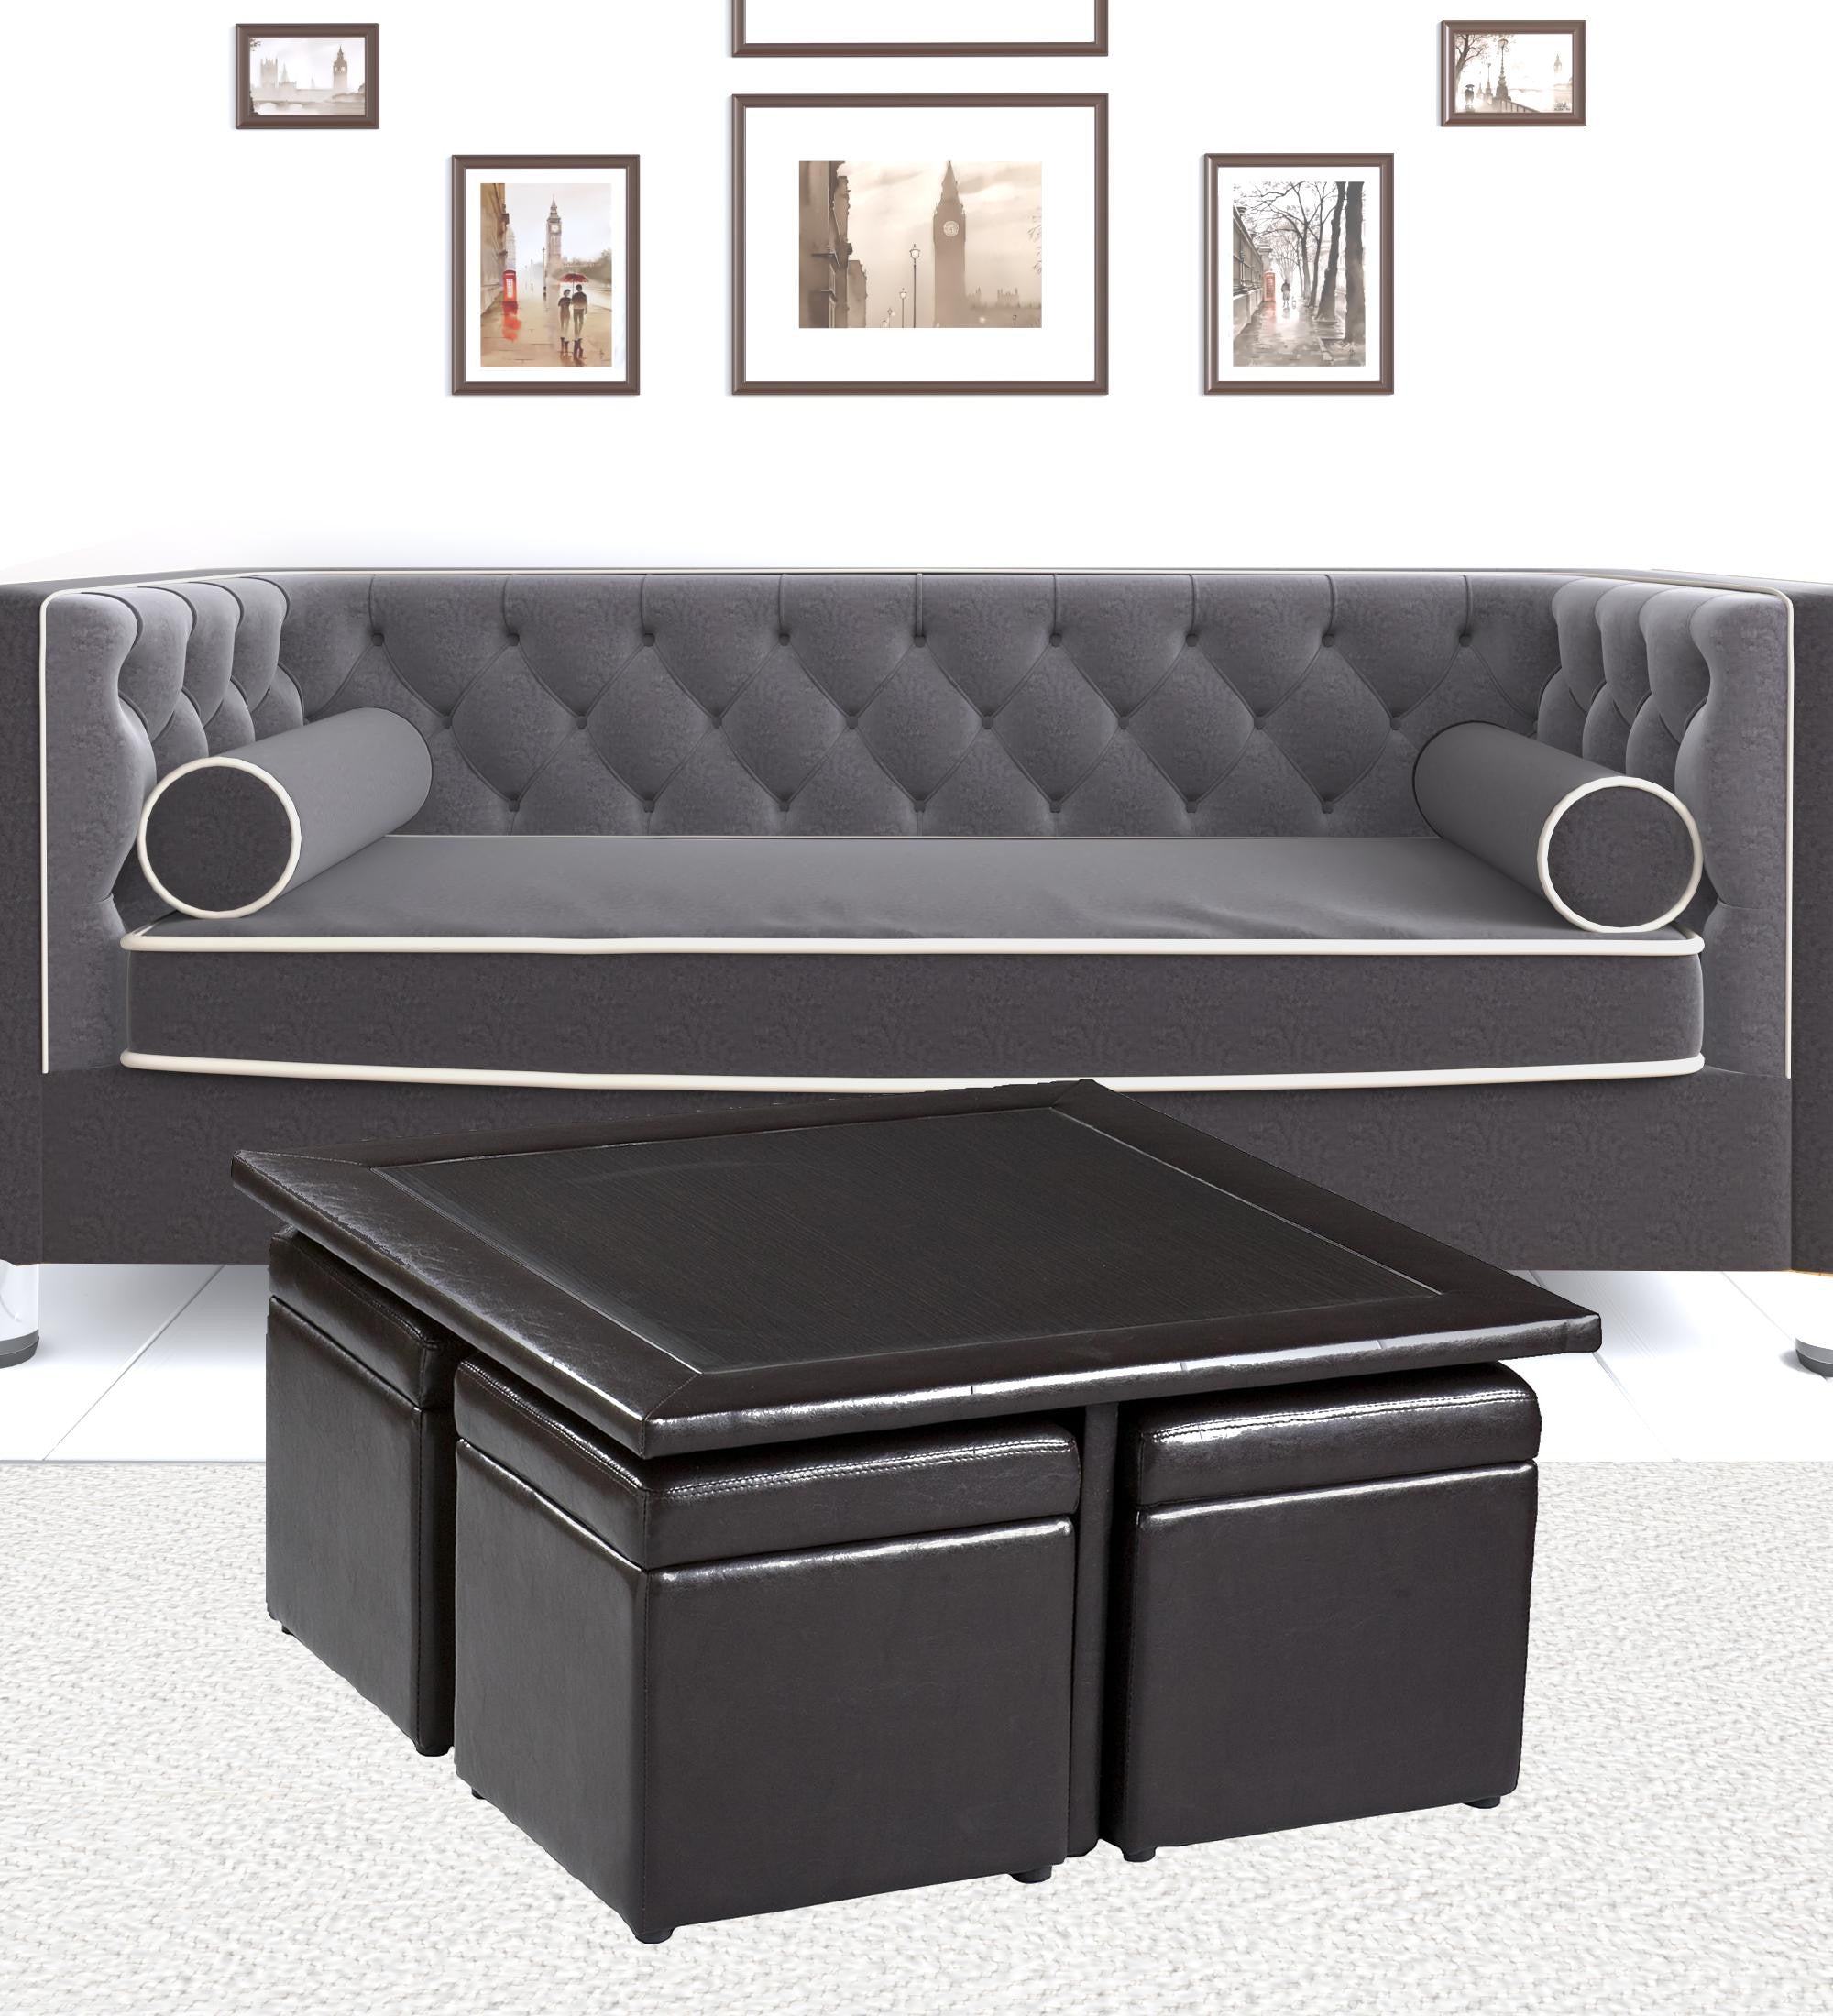 Five Piece Dark Brown Faux Leather Coffee Table and Storage Ottoman Set